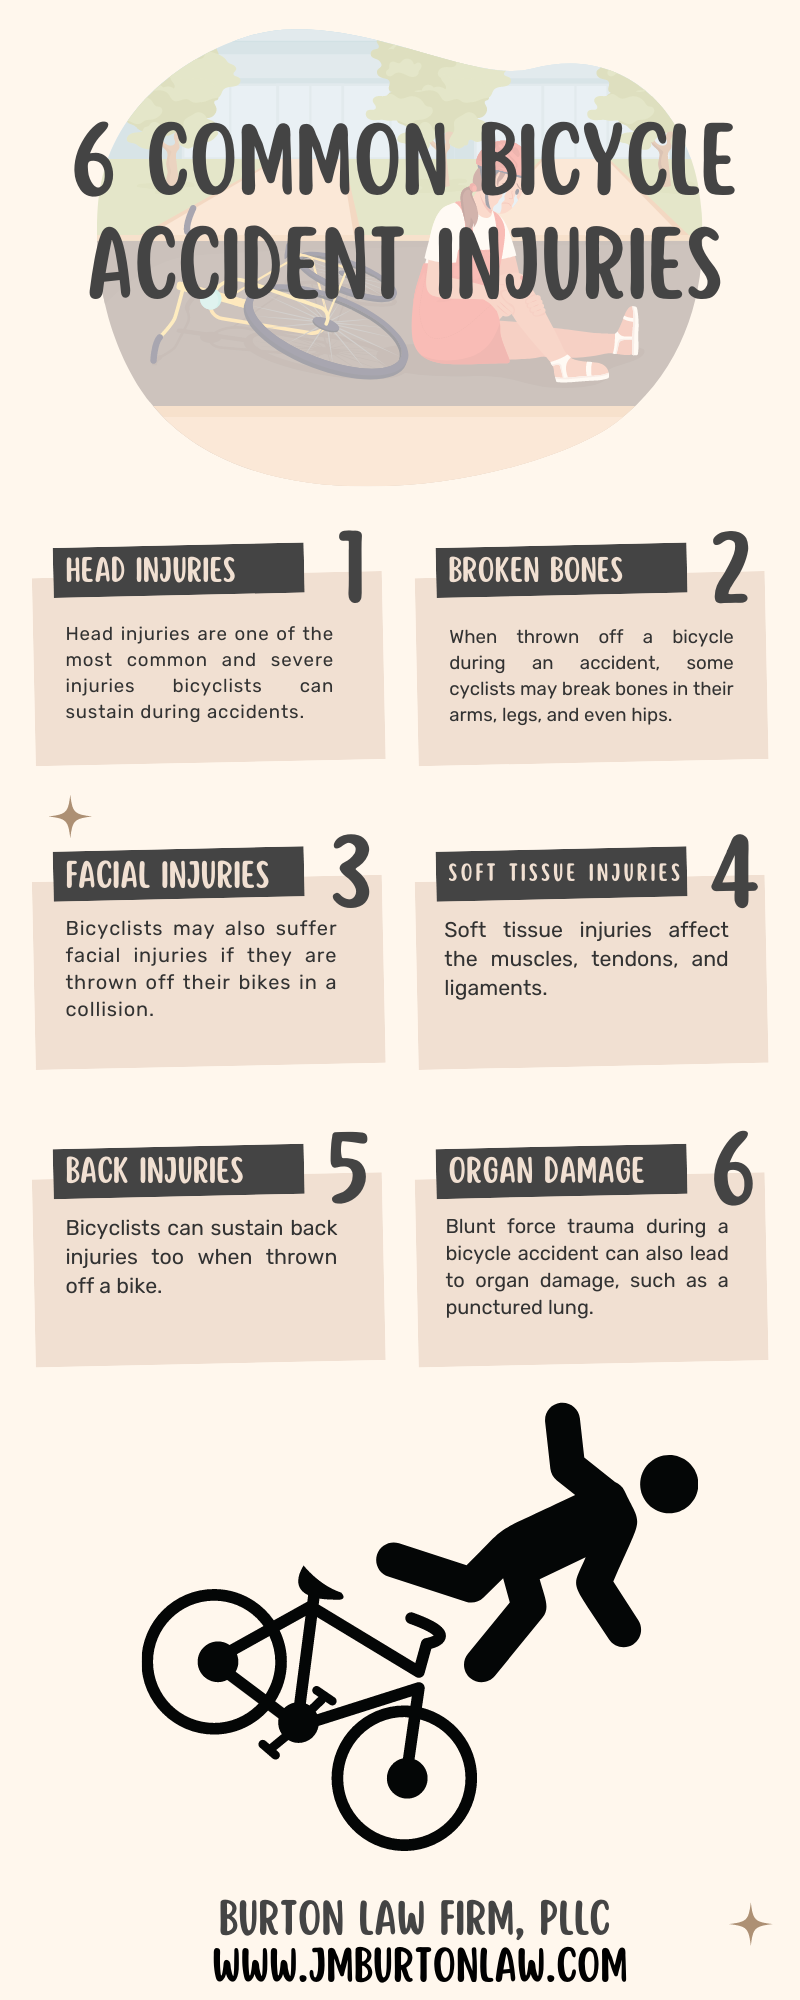 6 Common Bicycle Accident Injuries Infographic